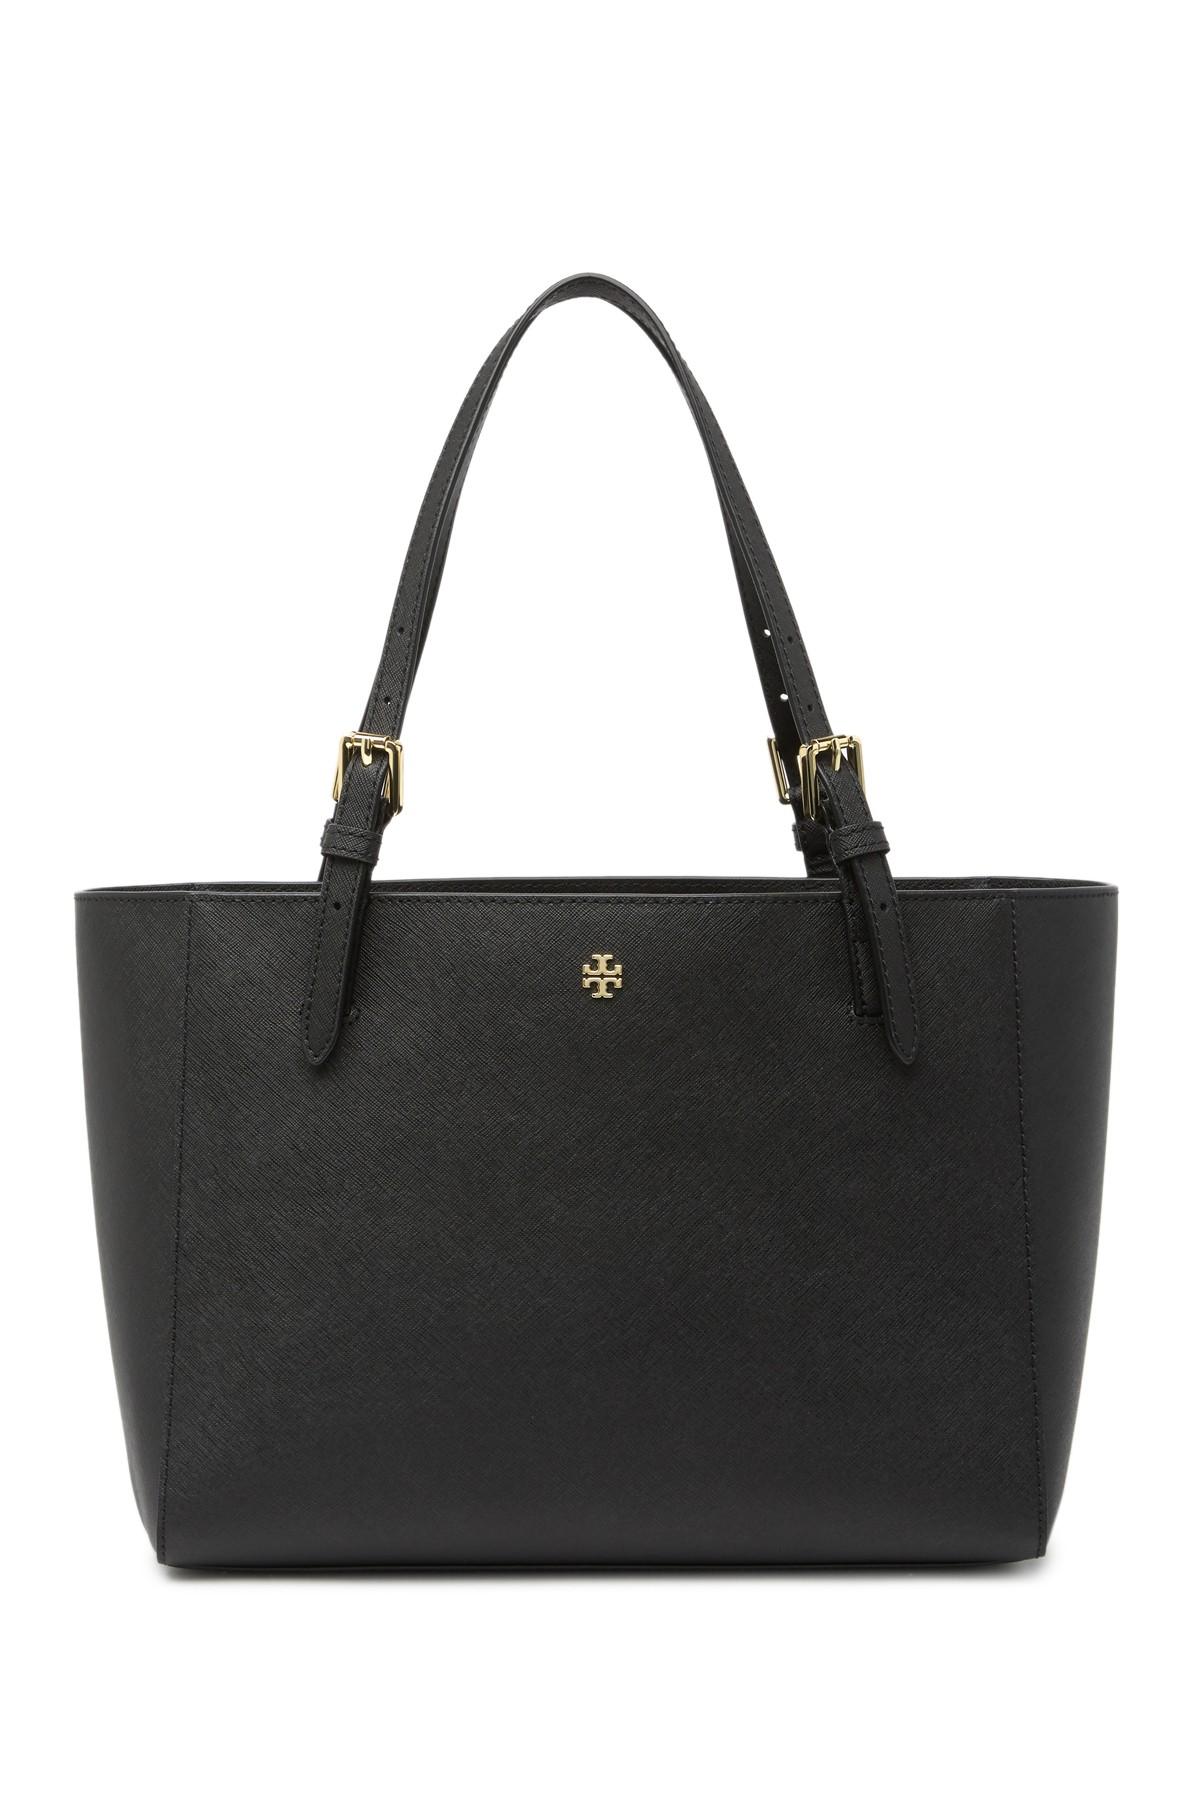 Tory Burch Emerson York Large Buckle Tote Bag 